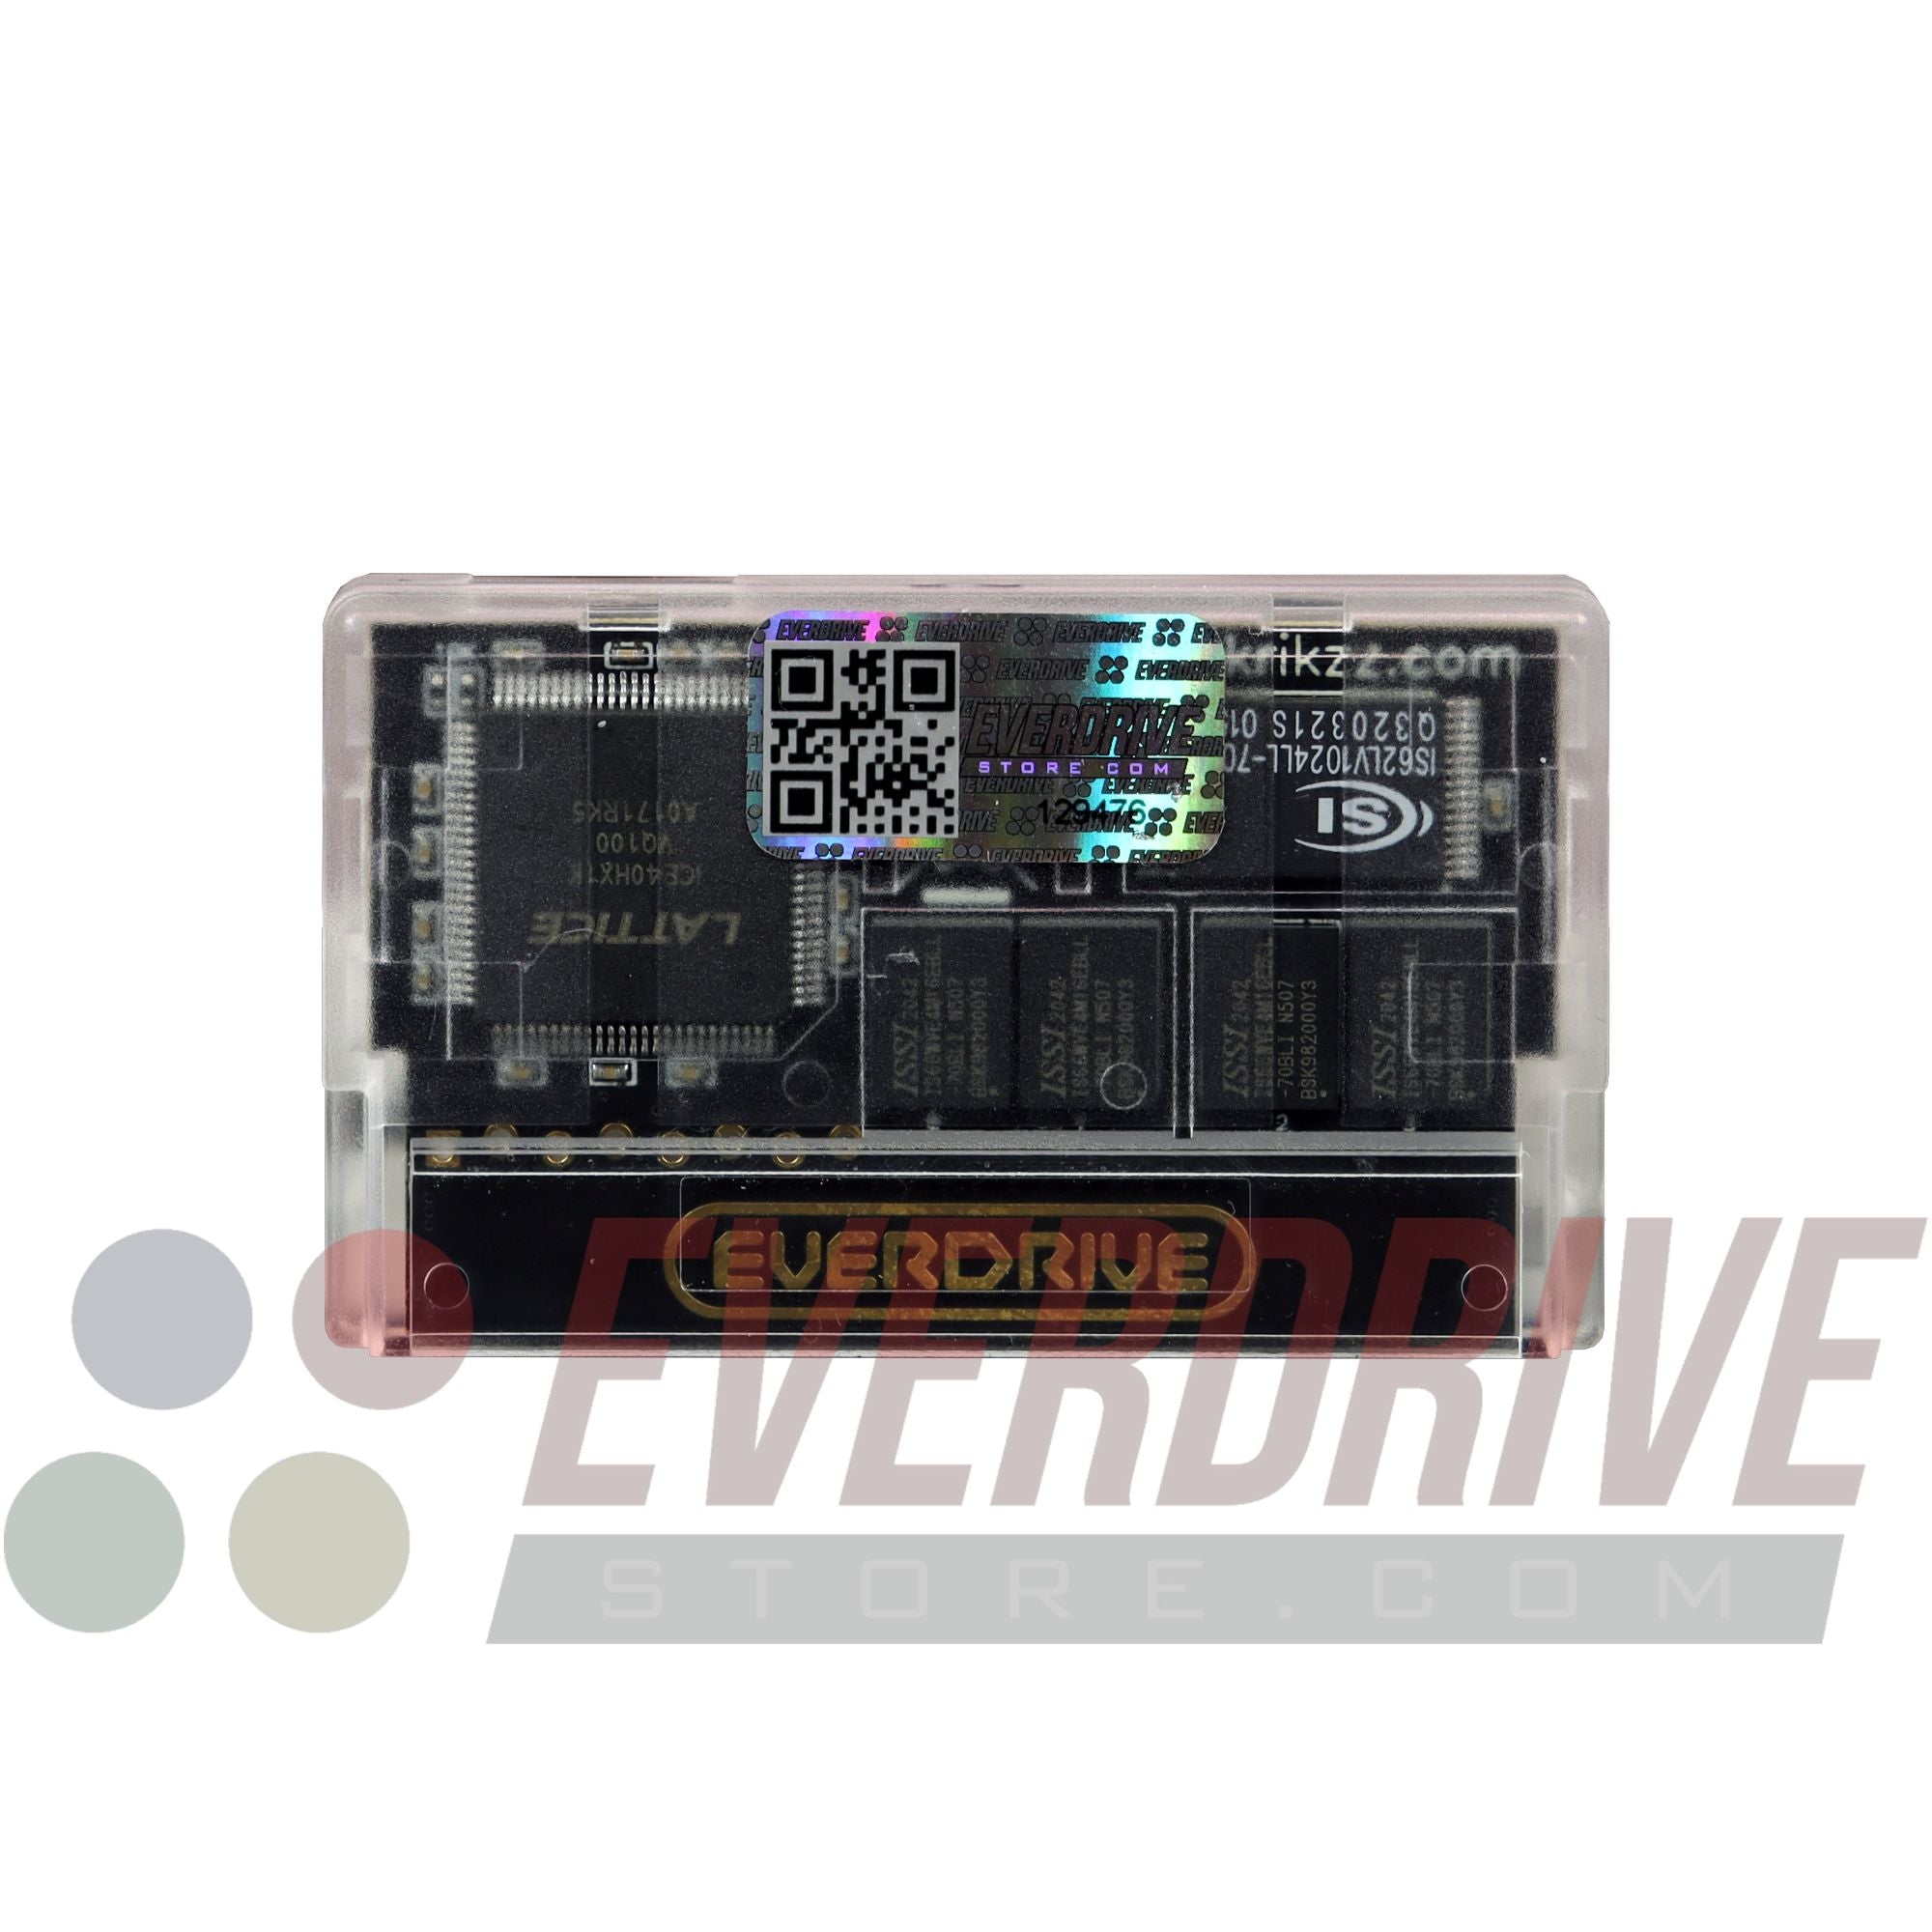 Everdrive GBA Mini - Frosted Clear – EverdriveStore.com